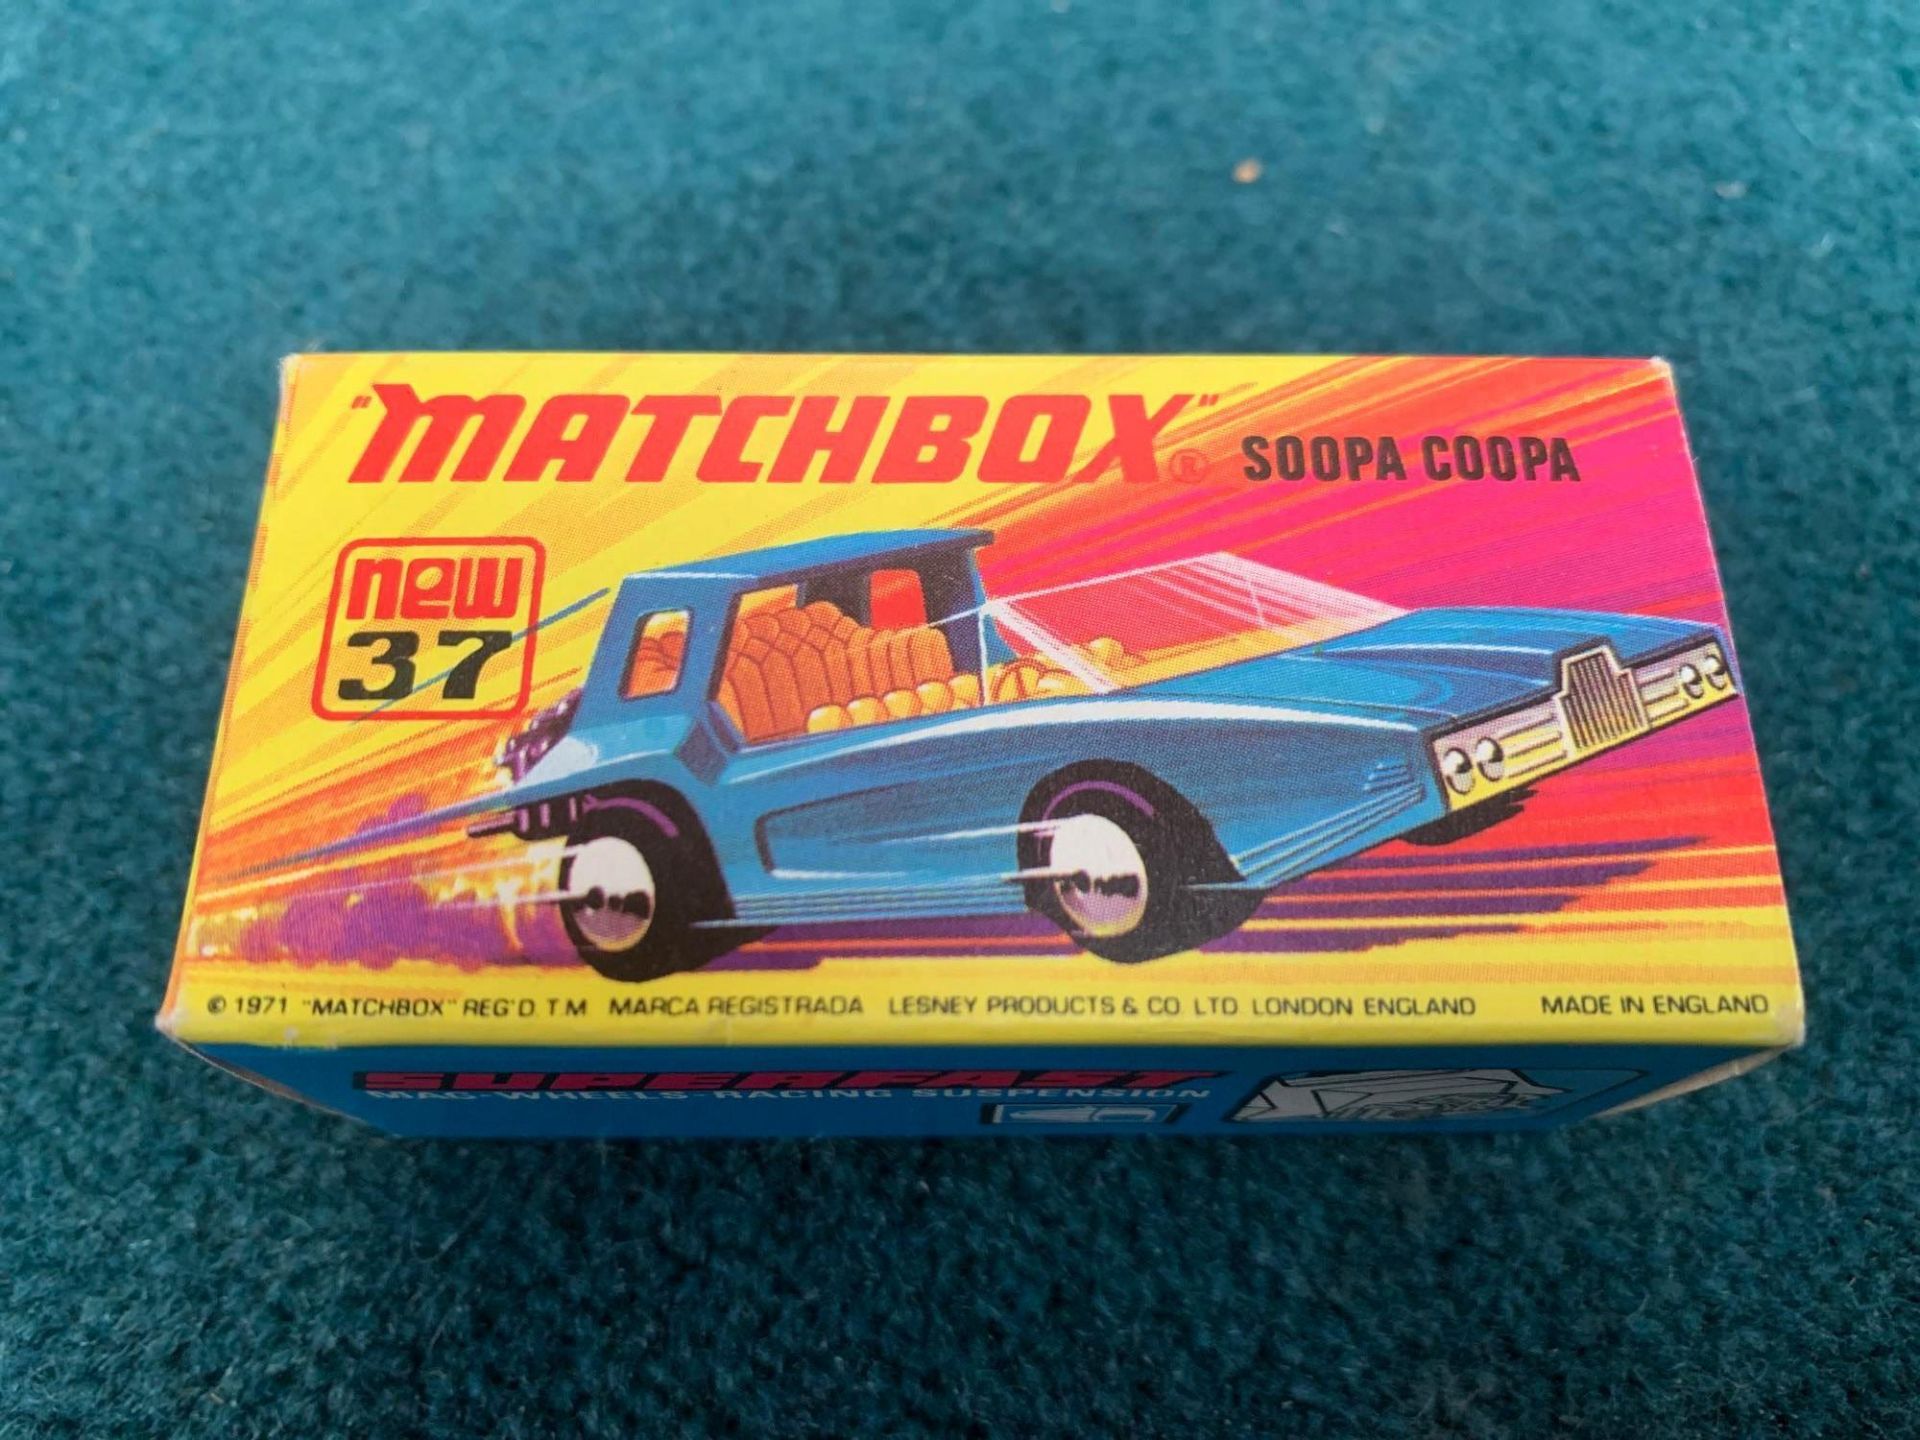 Matchbox 1972 Lesney Superfast Diecast Toy Car Soopa Coopa No. 37 - Image 4 of 4